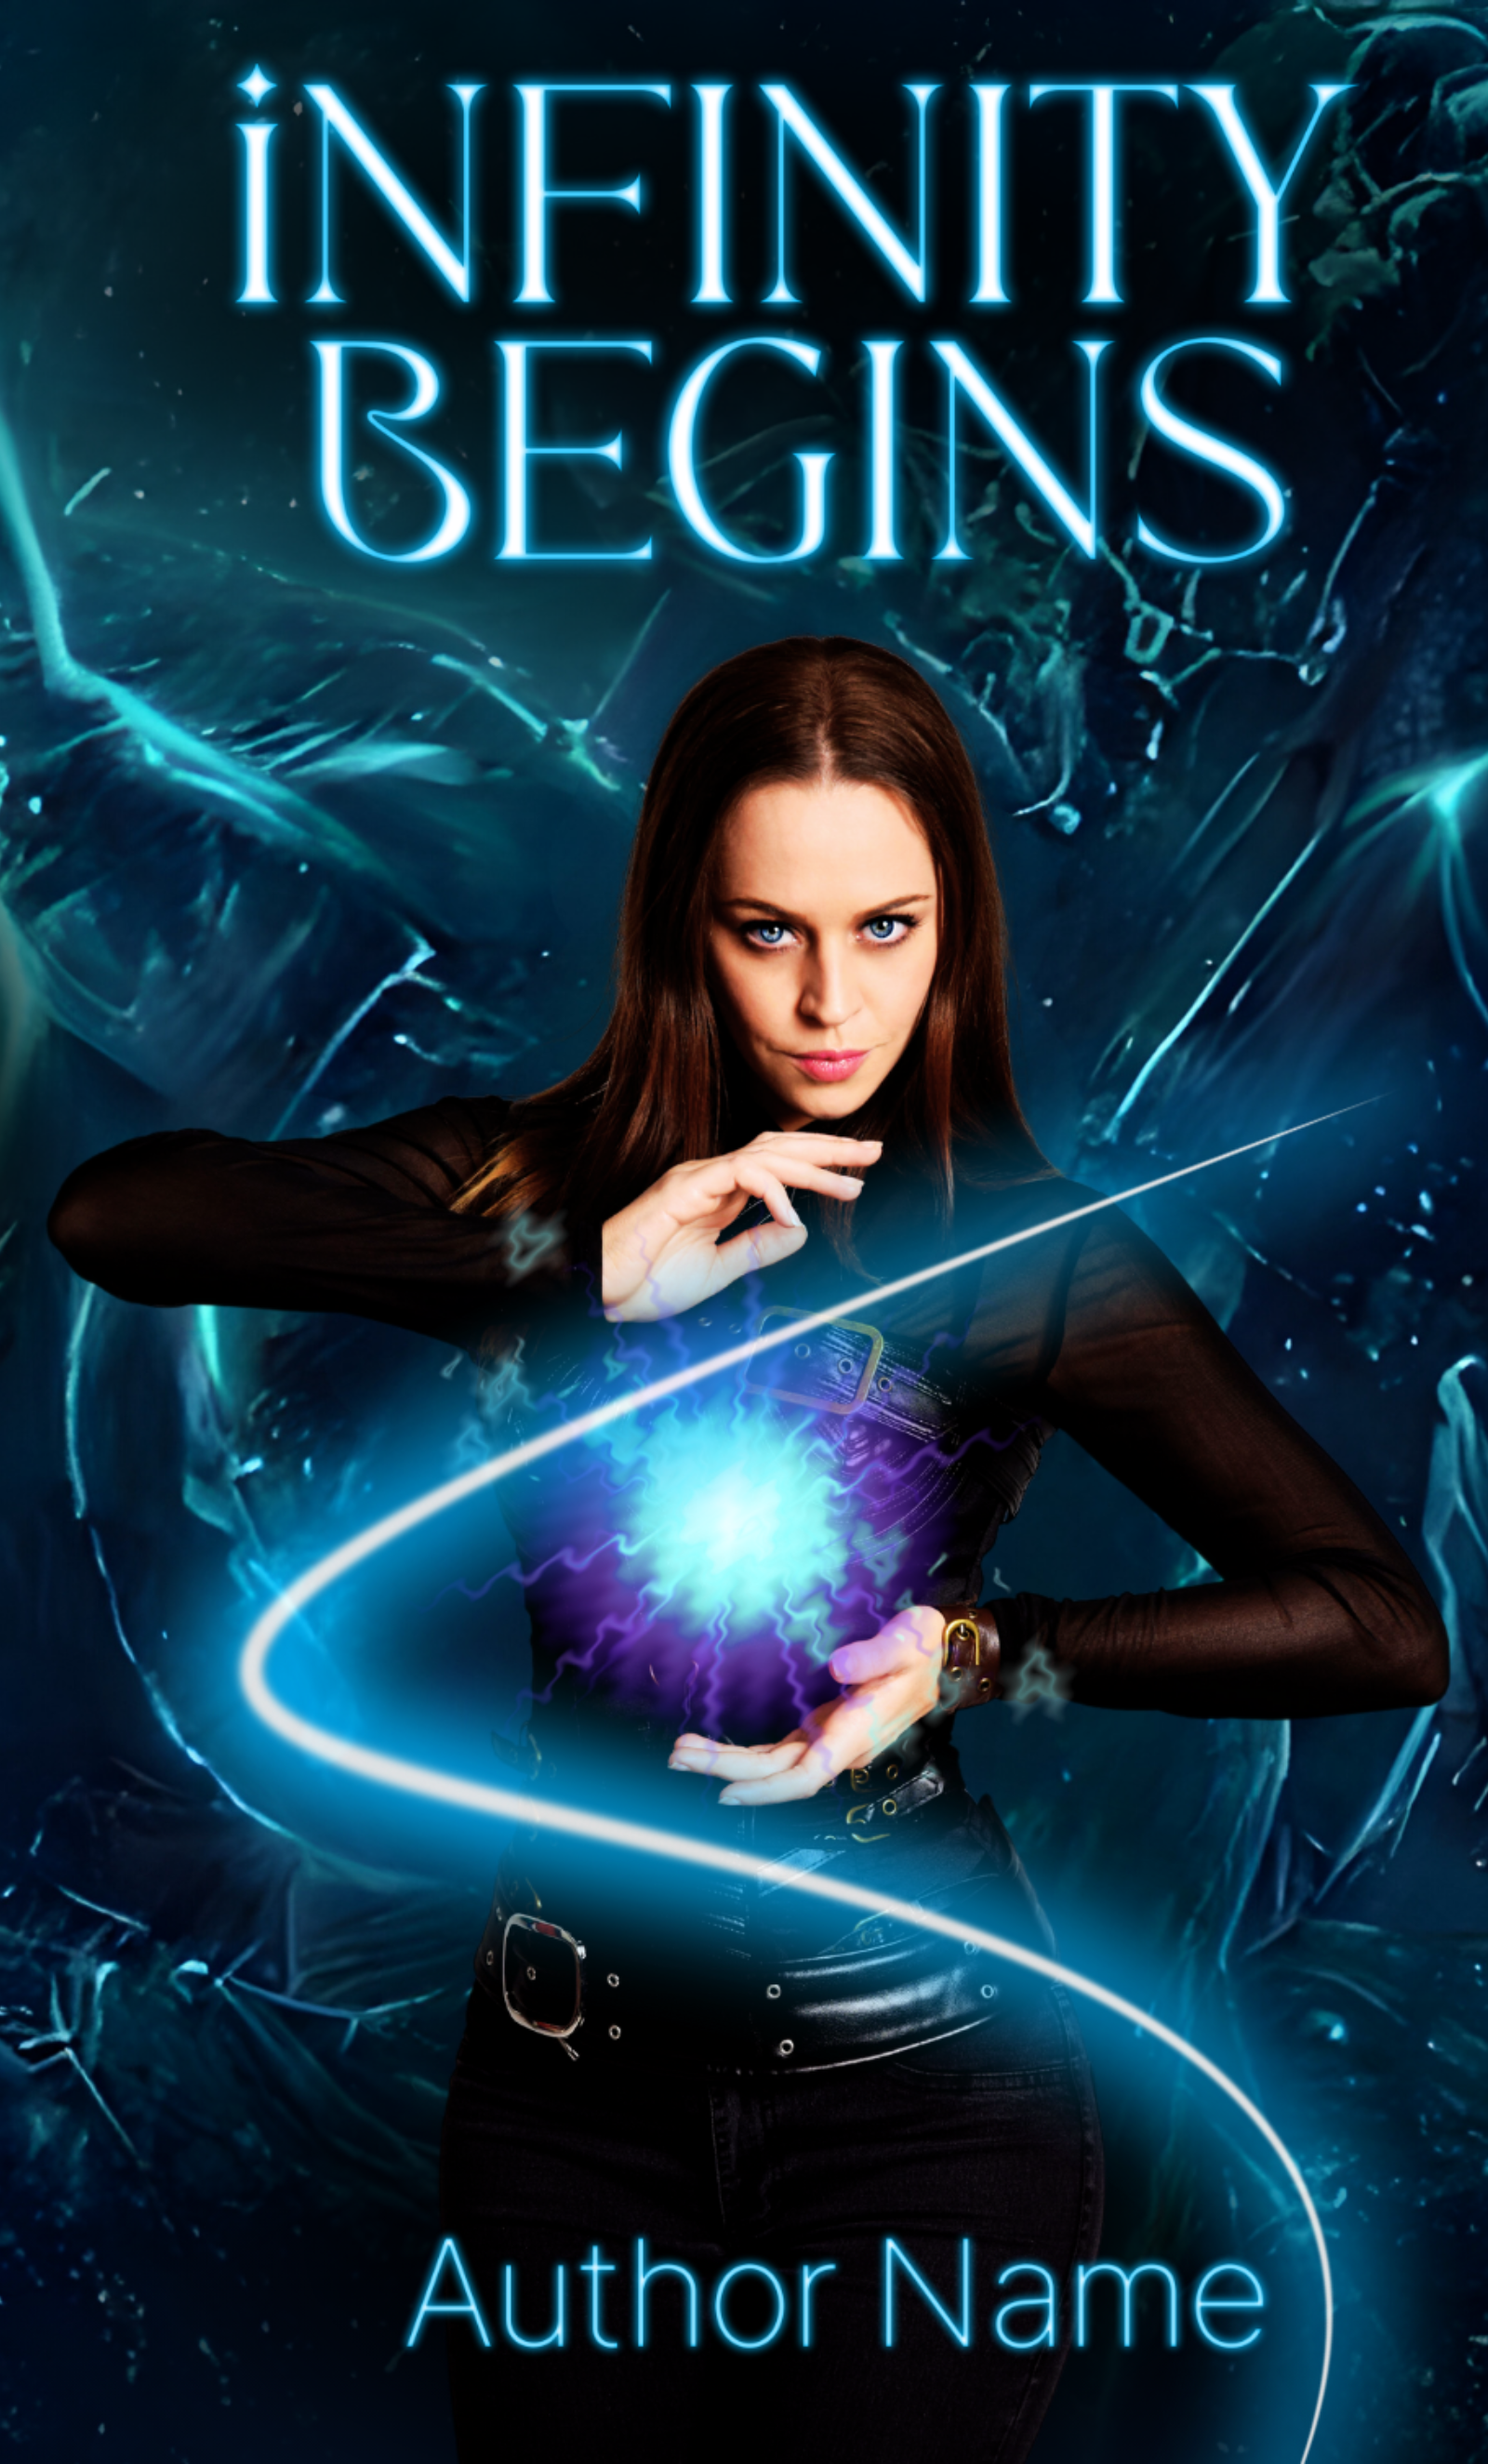 A dramatic book cover titled "Infinity Begins" by Karen Barnett features a woman in a black outfit holding a glowing blue orb with electric energy swirling around it. Her intense expression is illuminated by the light, and the background is a dynamic design of dark blues and blacks. The author's name is at the bottom. BookSelf Book Cover Design & Premade Book Covers